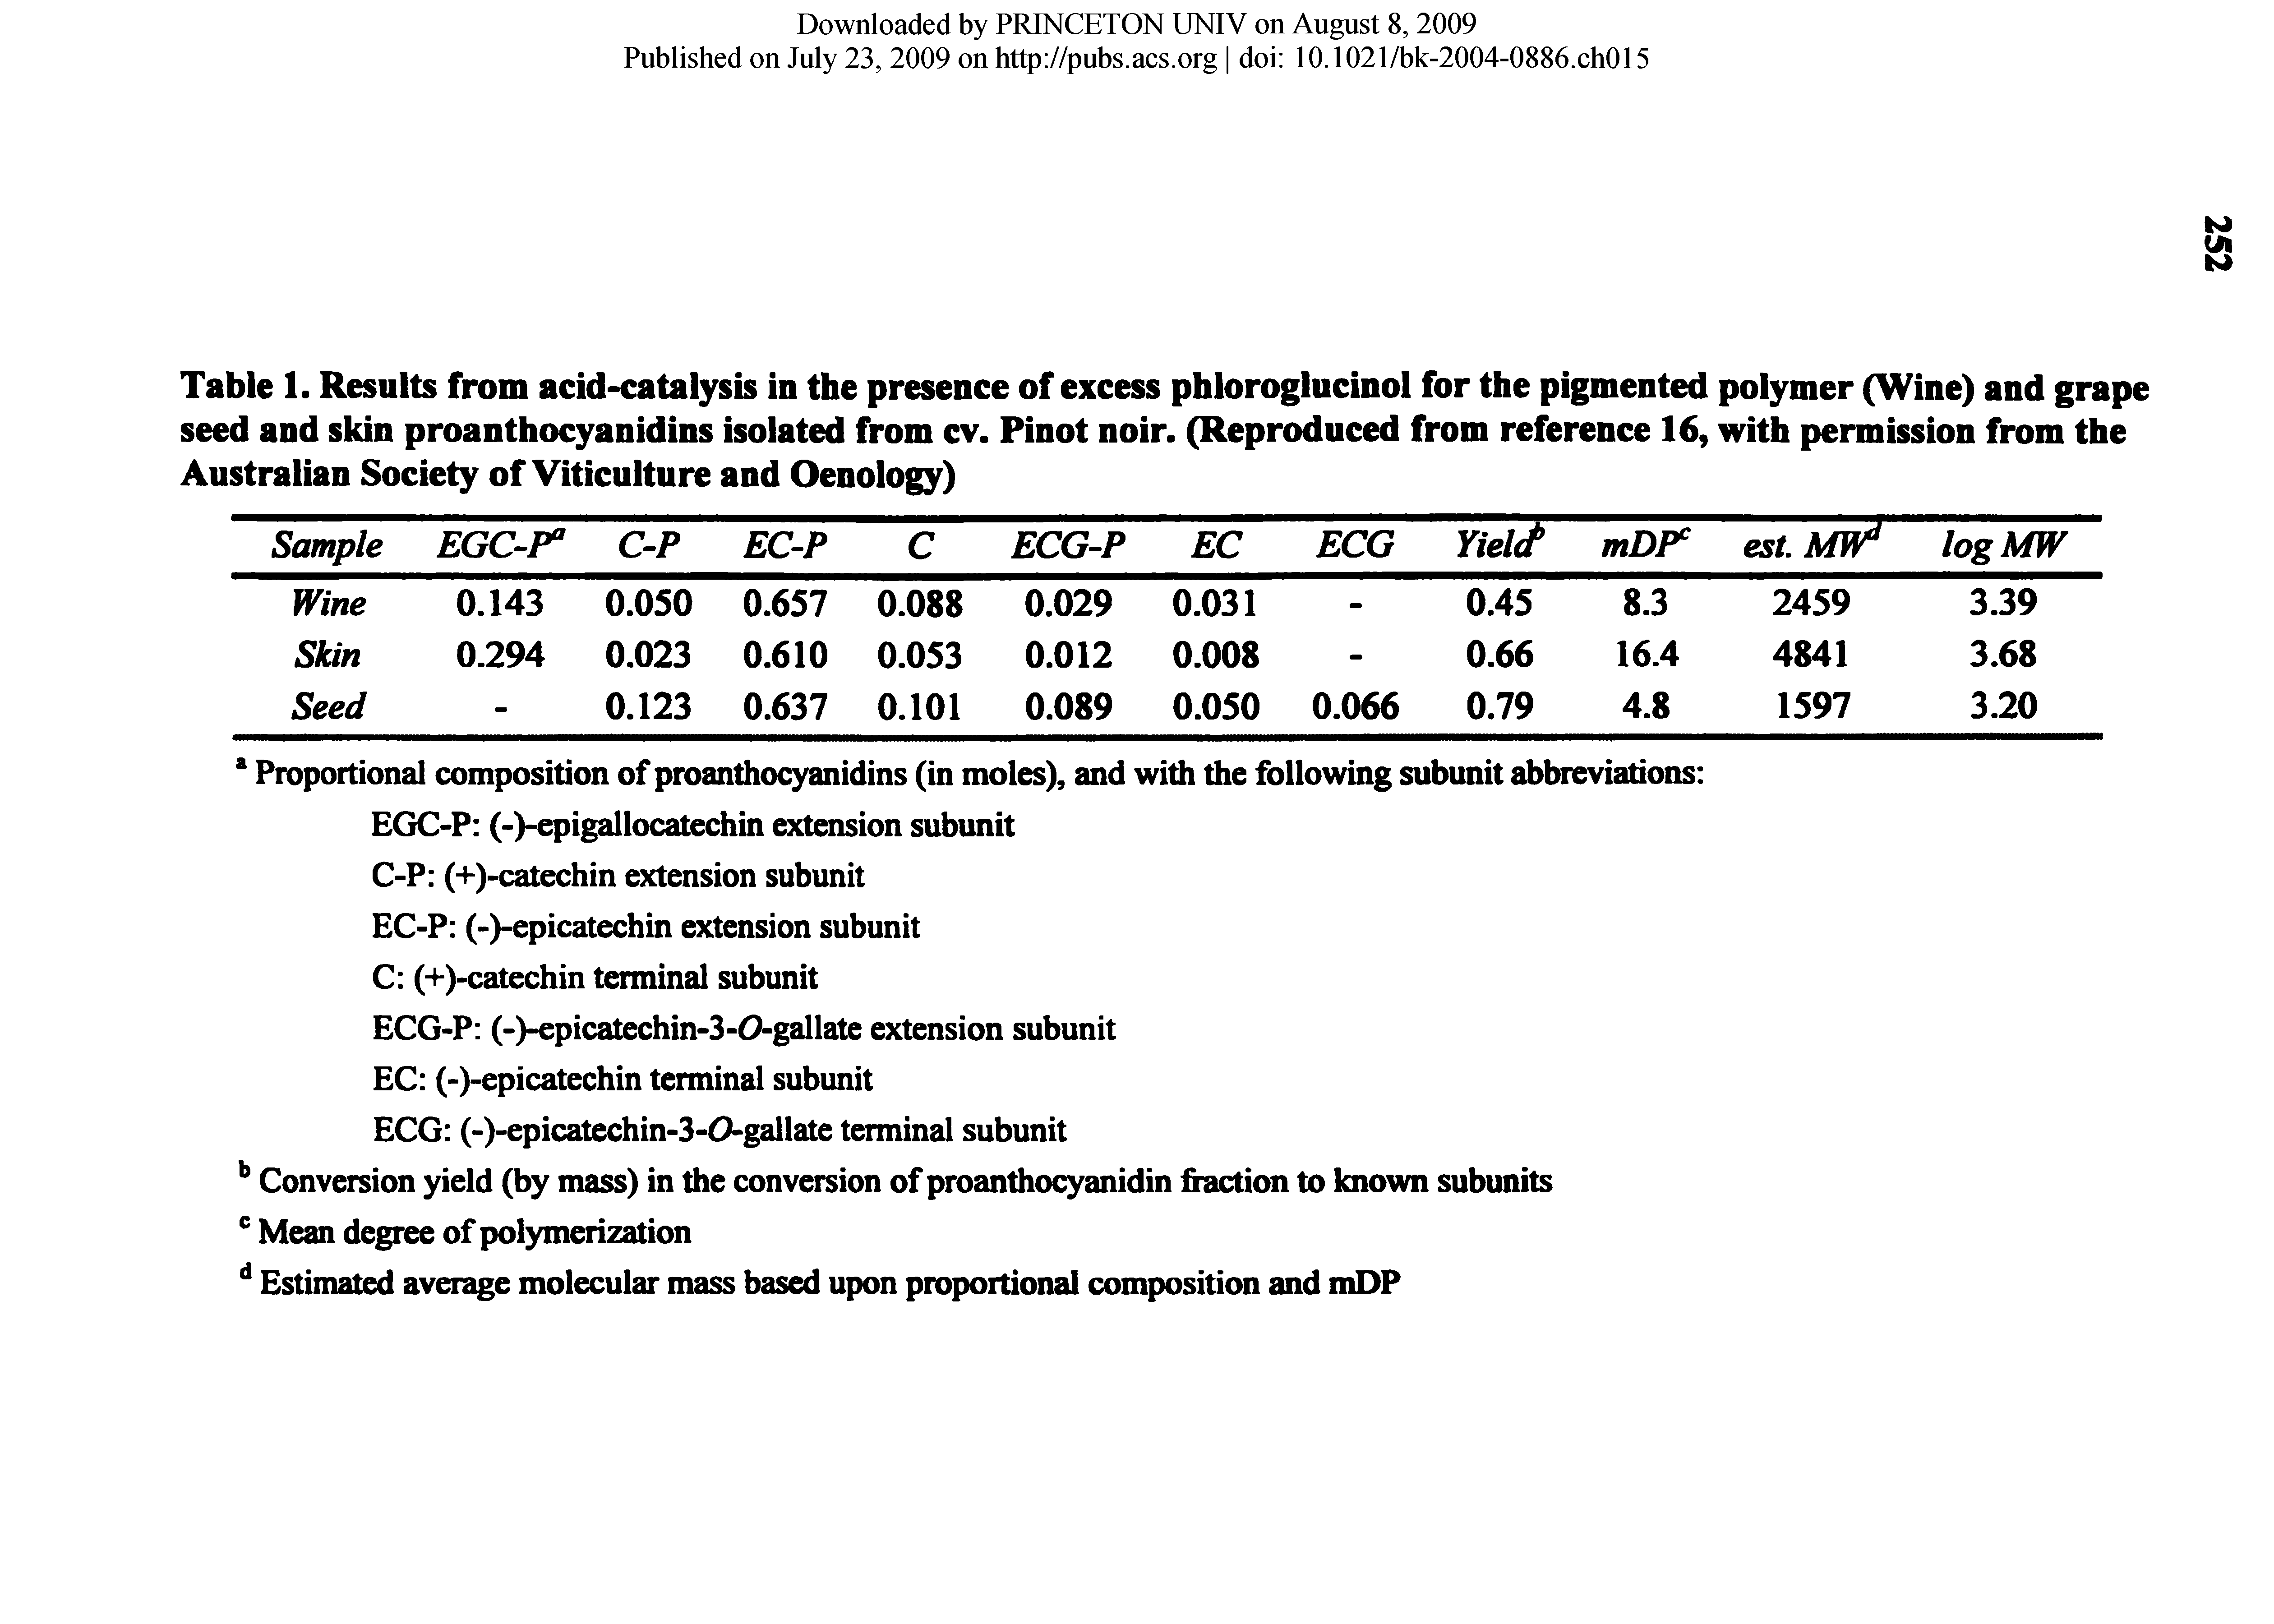 Table 1. Results from acid-catalysis in the presence of excess phloroglucinol for the pigmented polymer (Wine) and grape seed and skin proanthocyanidins isolated from cv. Pinot noir. (Reproduced from reference 16, with permission from the Australian Society of Viticulture and Oenology)...